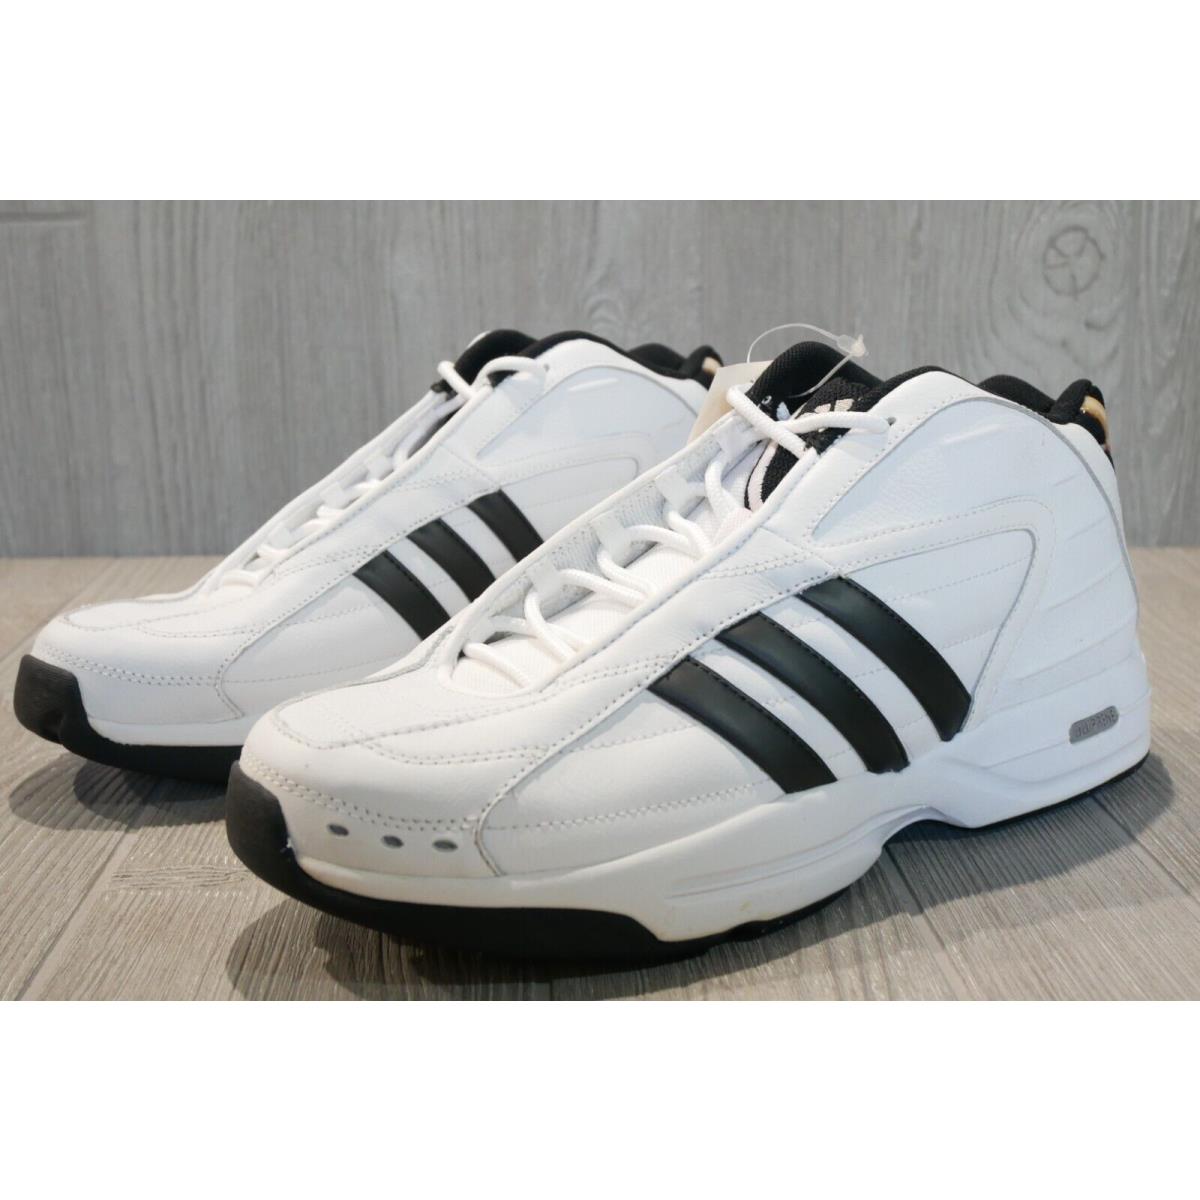 Vintage Adidas Instigate Basketball Shoes 2000 Mens Size 9 12 13 Oss |  692740561509 - Adidas shoes Vintage - White | SporTipTop